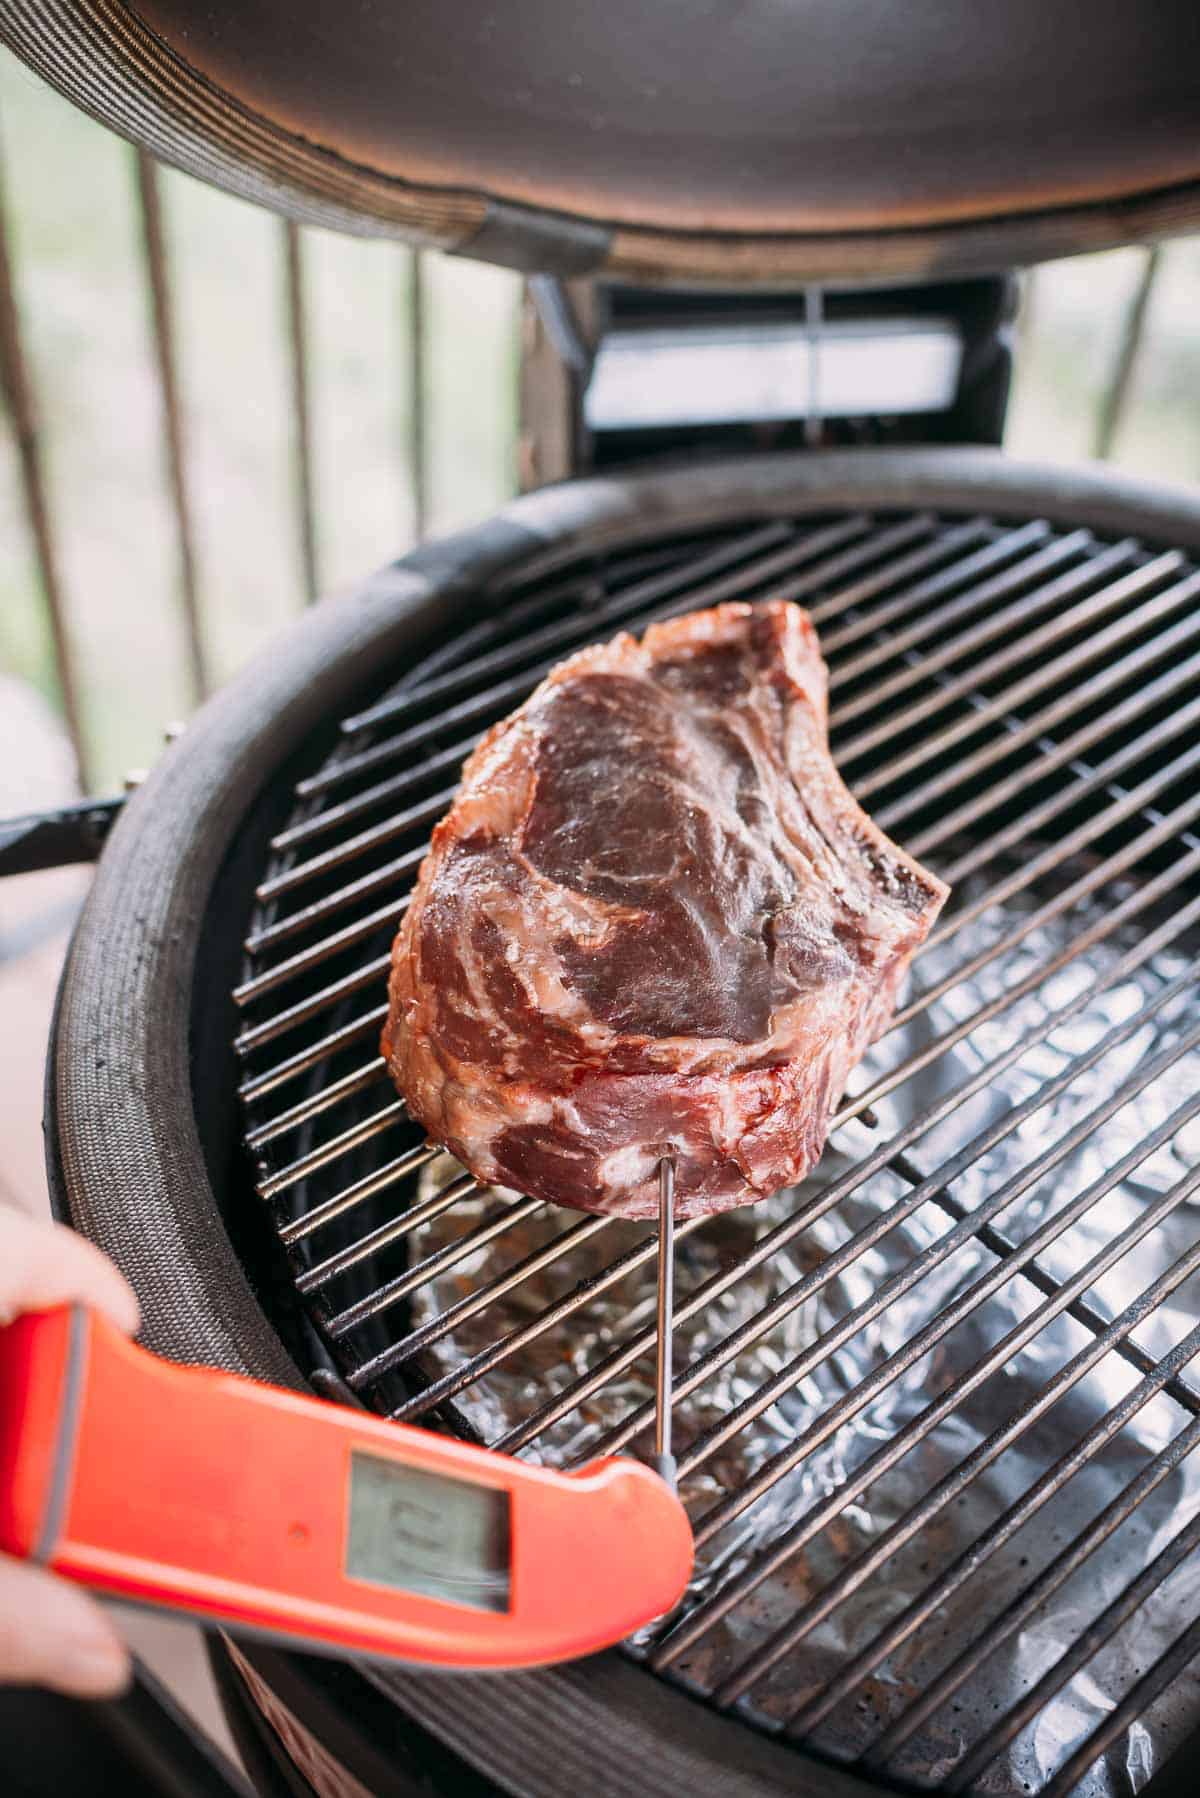 A hand holds a food thermometer inserted into a large steak cooking on a grill with the lid open.